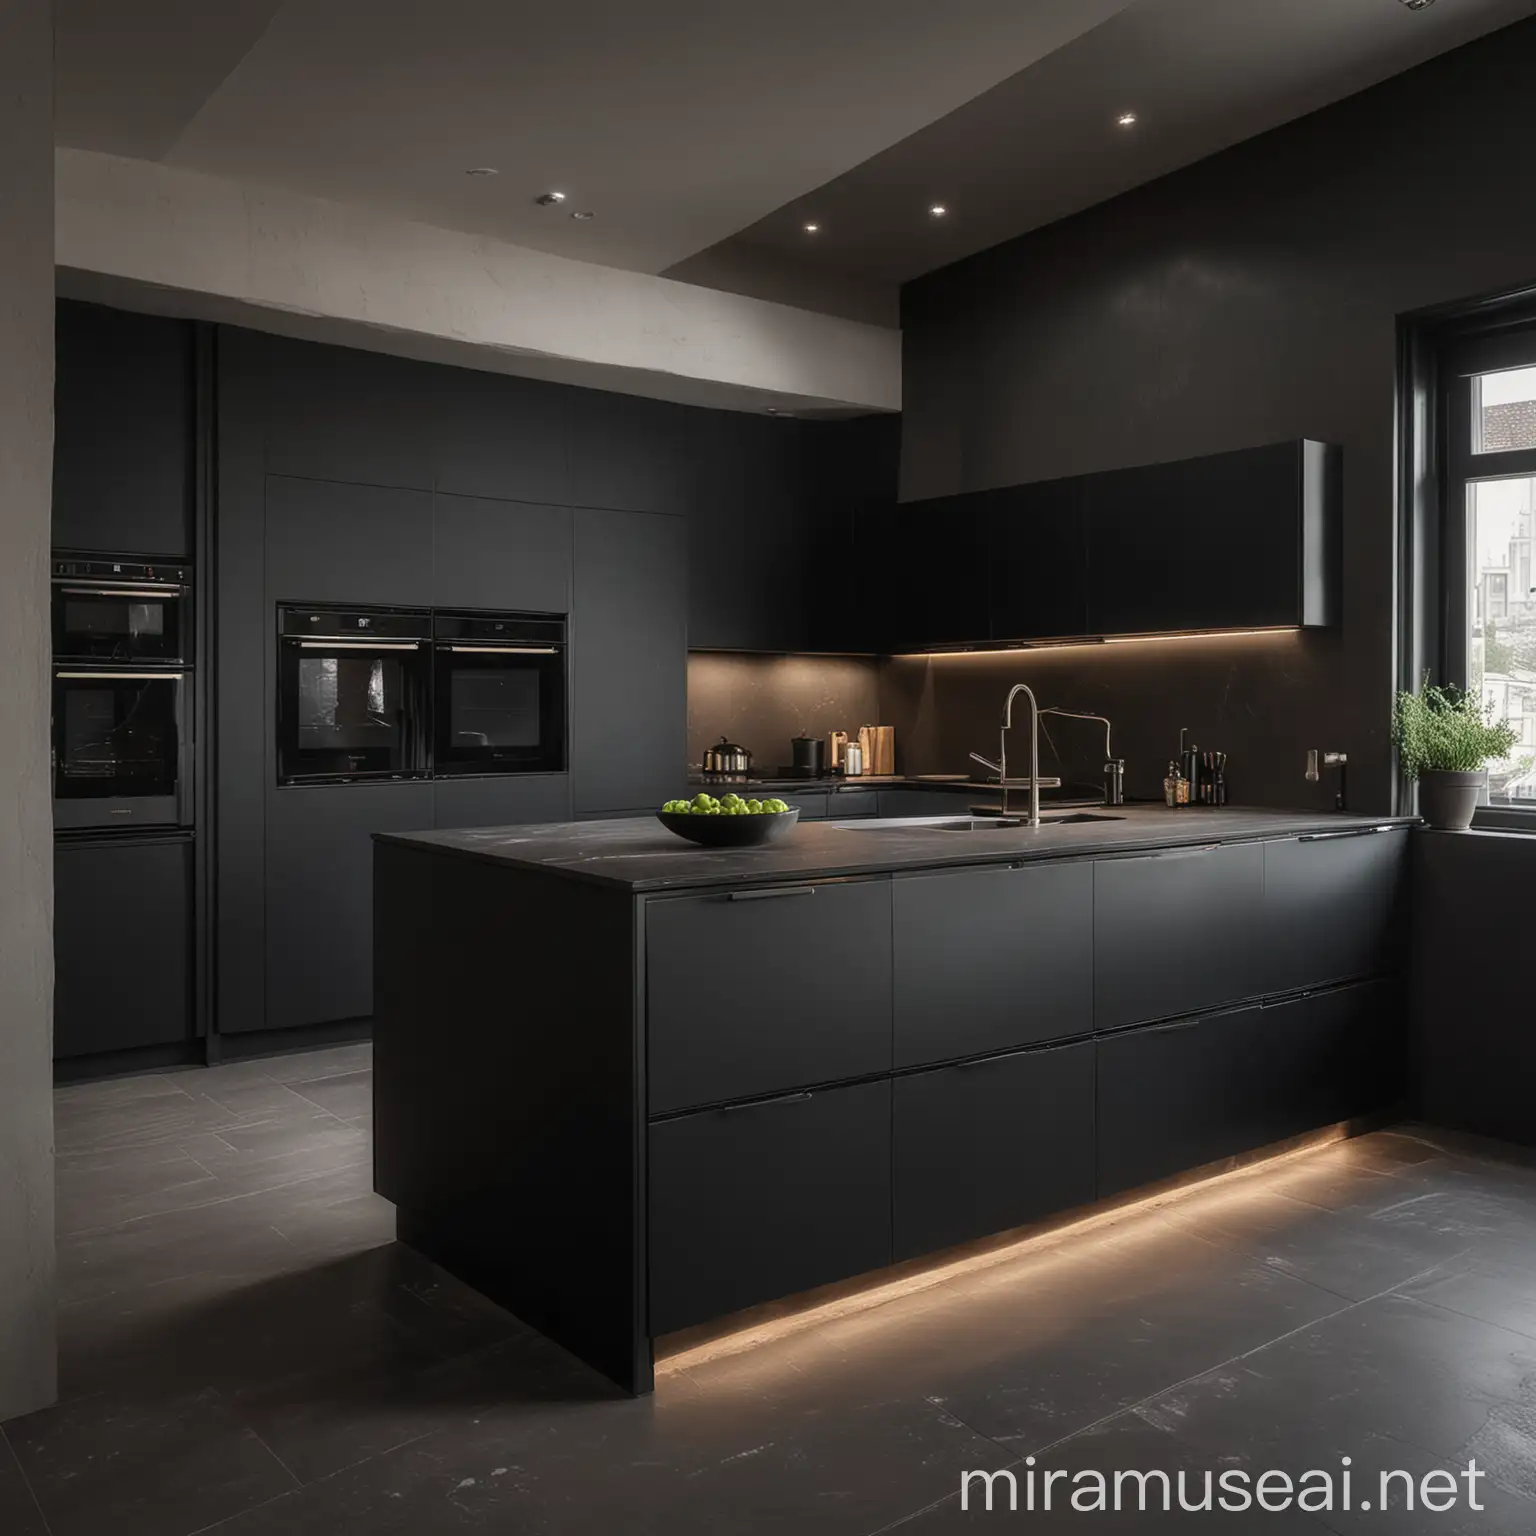 a luxurios but minimalistic black kitchen. close look at stand